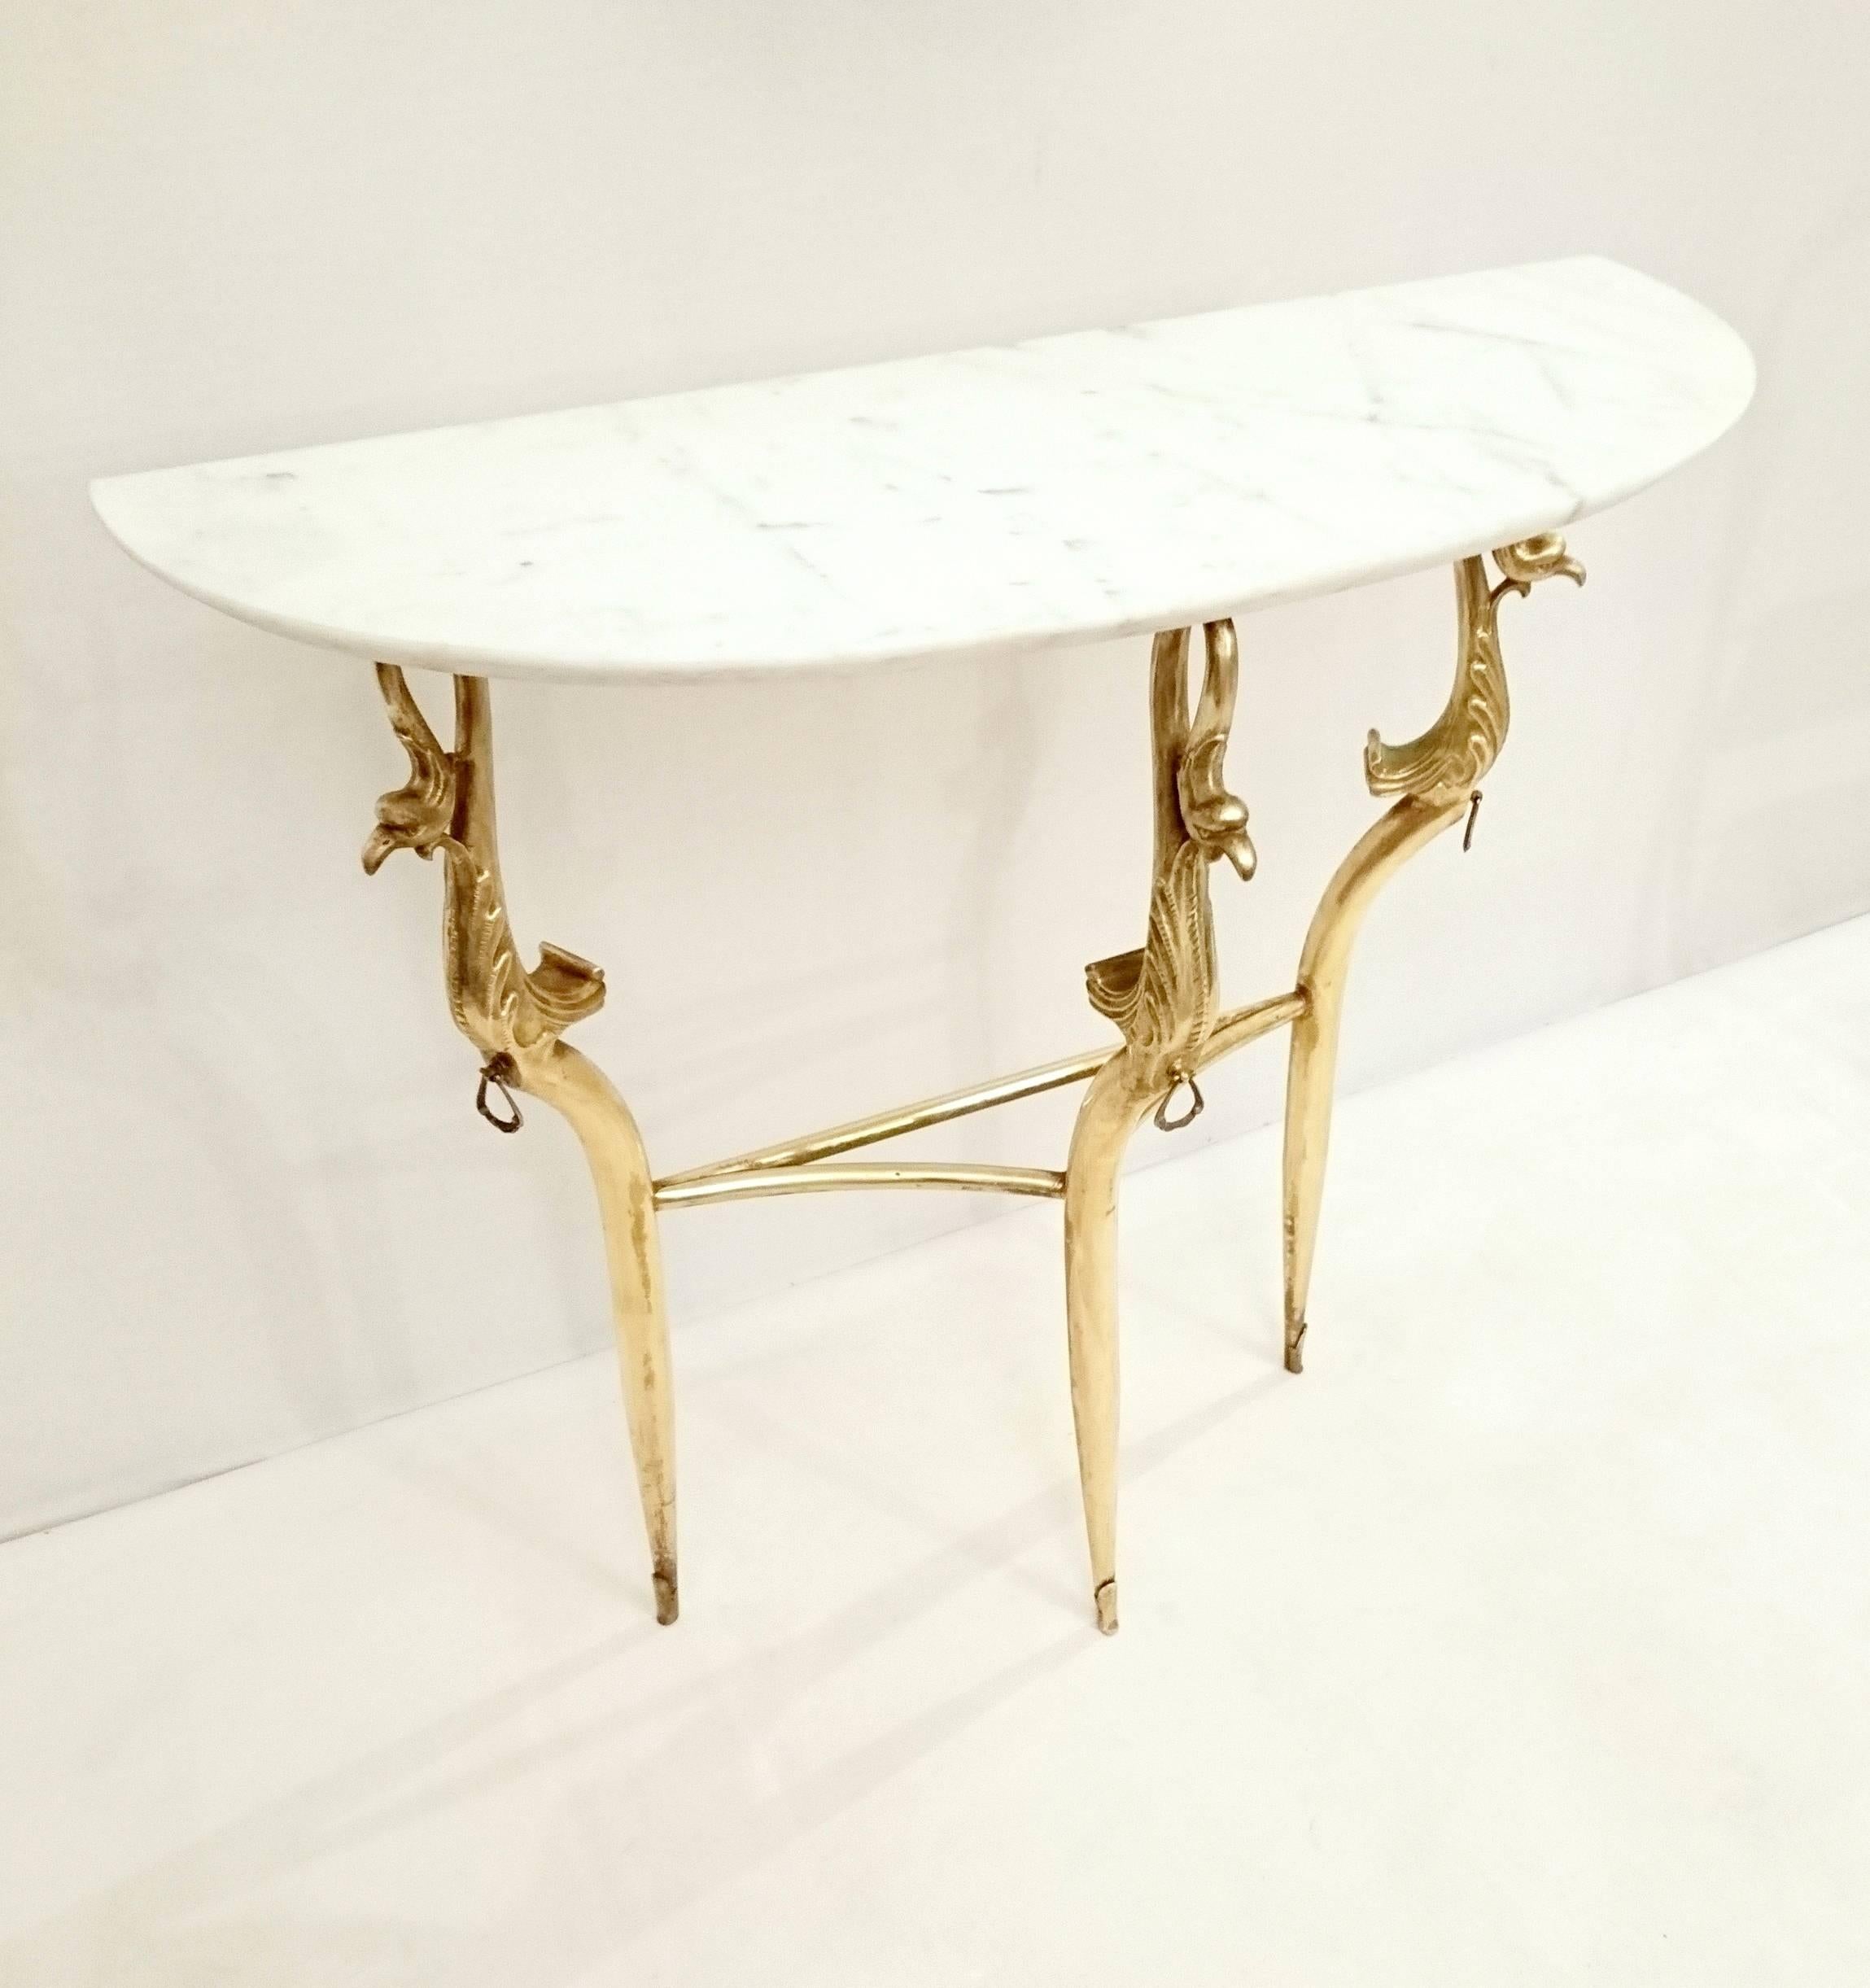 Italian console table in carrara marble and brass made in the 1950s in empire style with an oval mirror. The mirror measures 78x50 cm